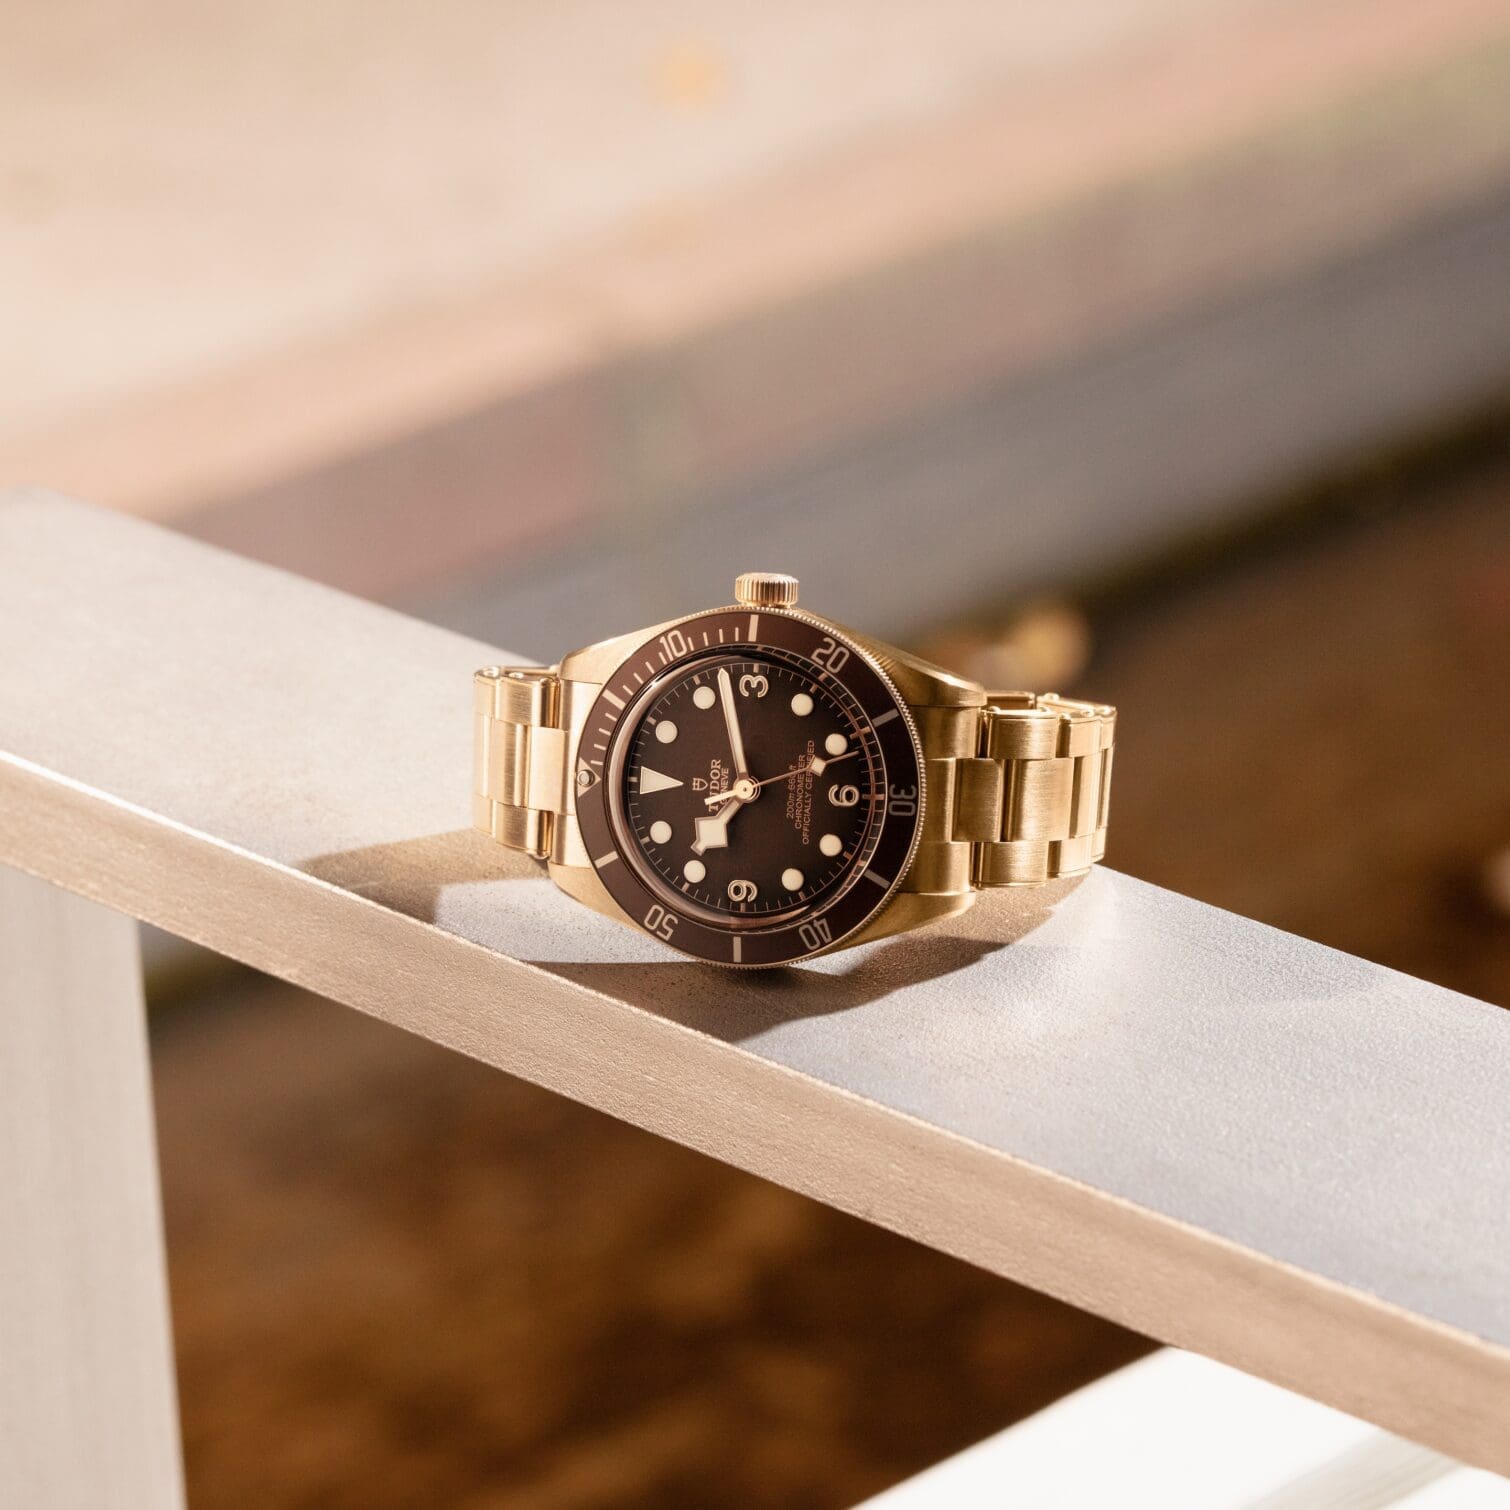 A Tudor Black Bay Bronze 58 became my milestone watch to celebrate taking charge of my mental health